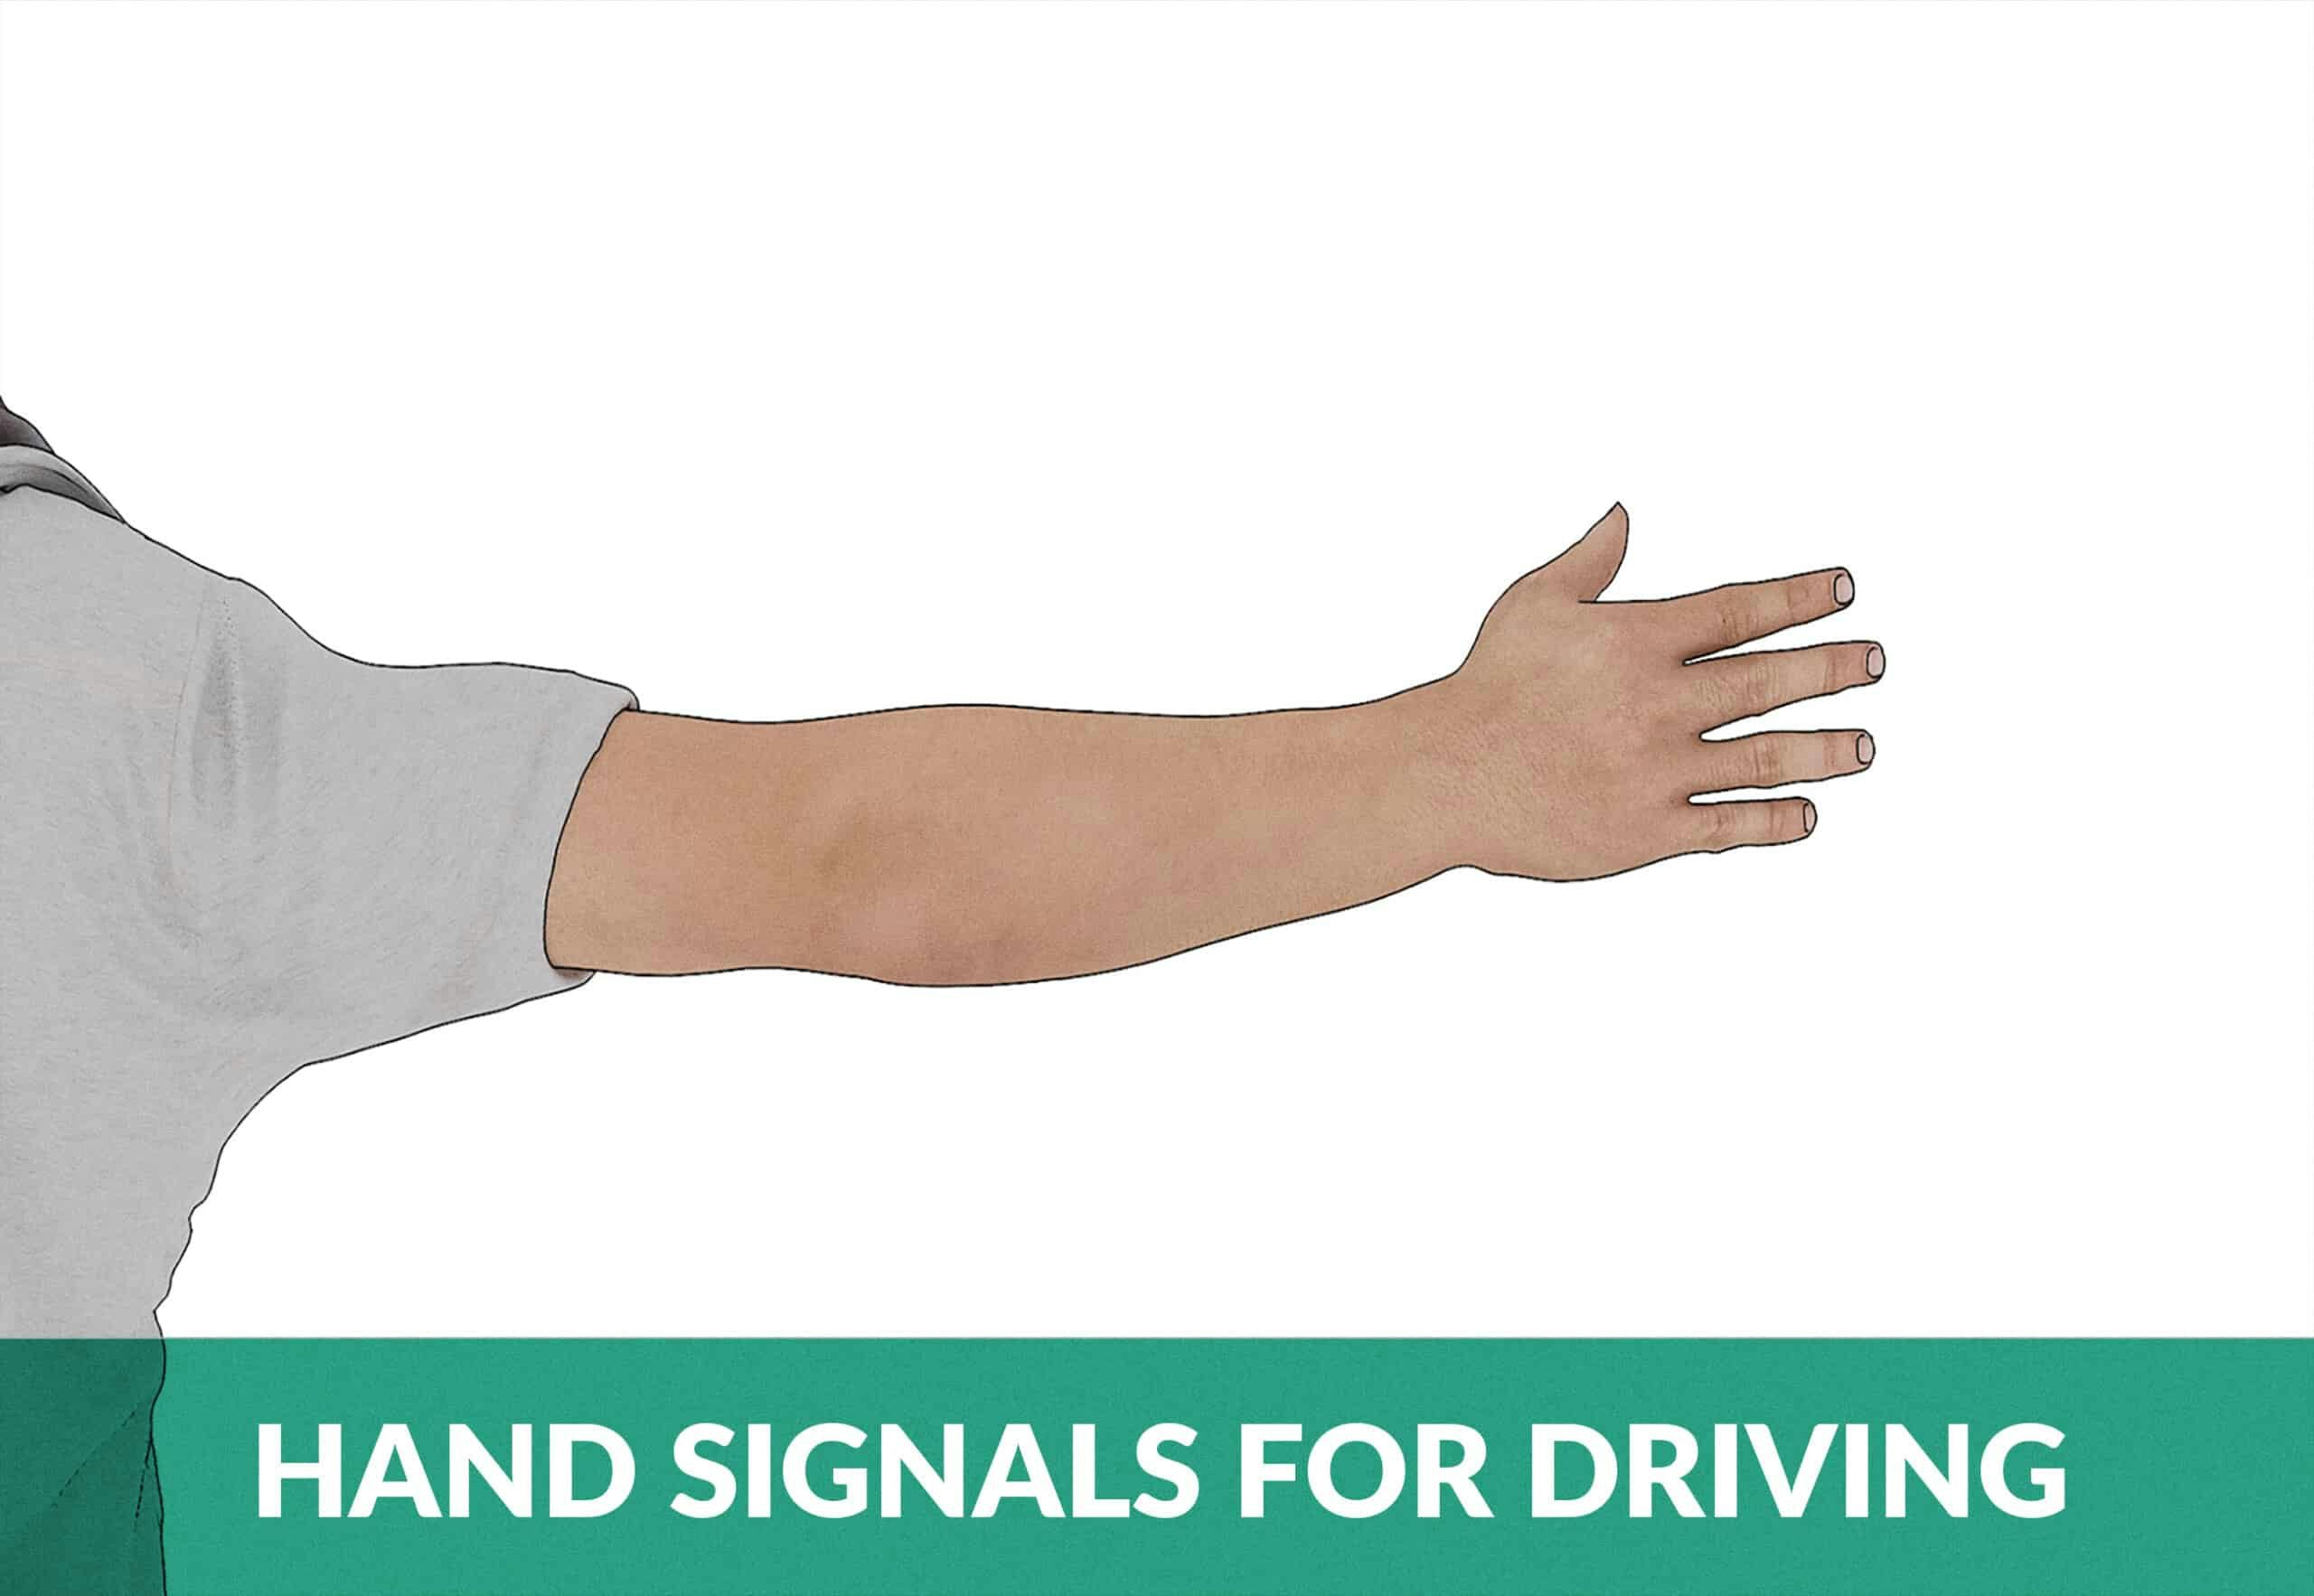 https://media-blog.zutobi.com/wp-content/uploads/sites/5/2021/09/29072553/hand-signals-for-driving-scaled.jpg?w=2560&auto=format&ixlib=next&fit=max